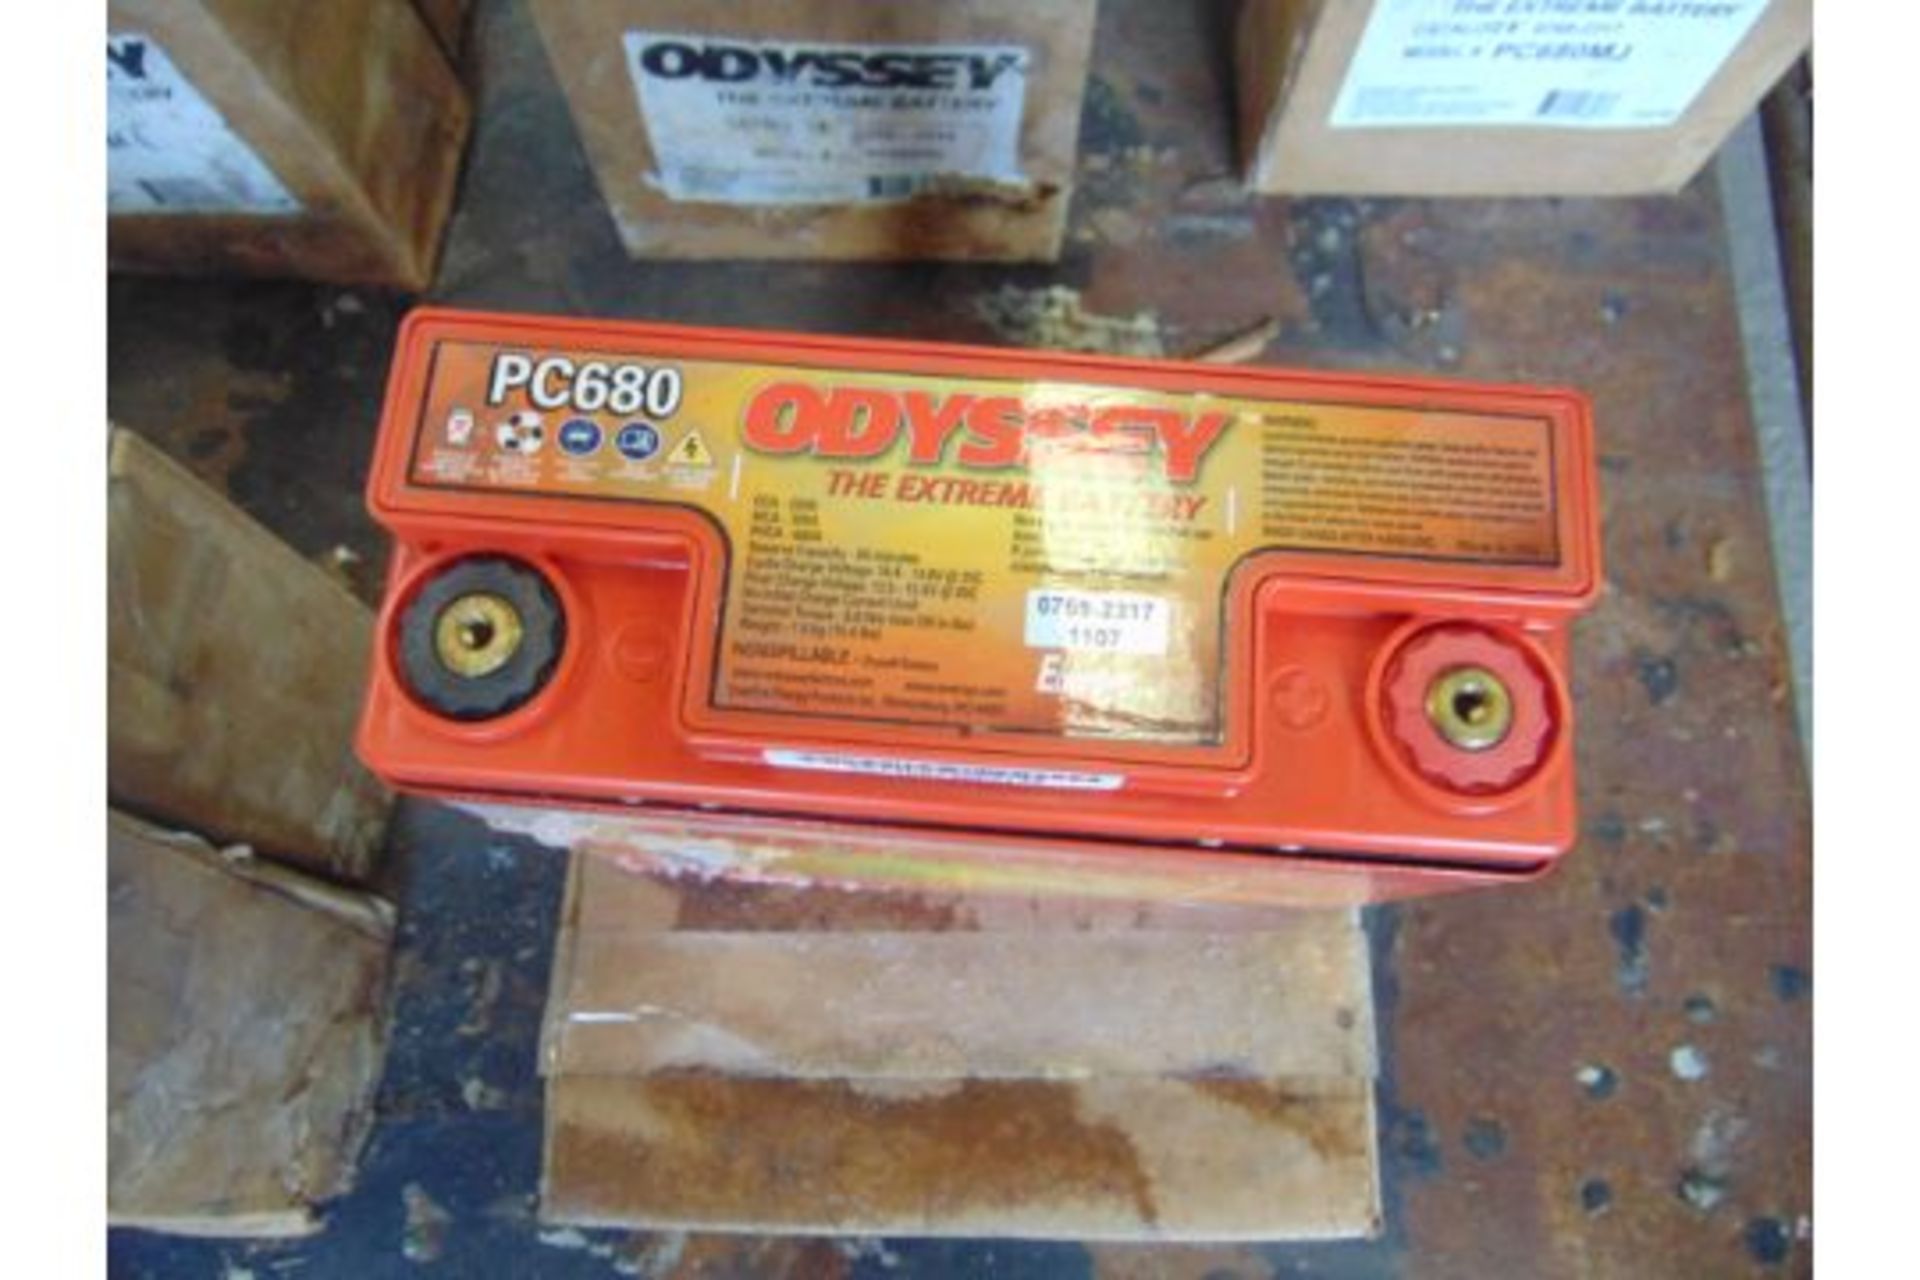 2 x ODYSSEY Extreme Pc680 MJ non spillable 12 Volt Batteries Unissued - Image 3 of 4